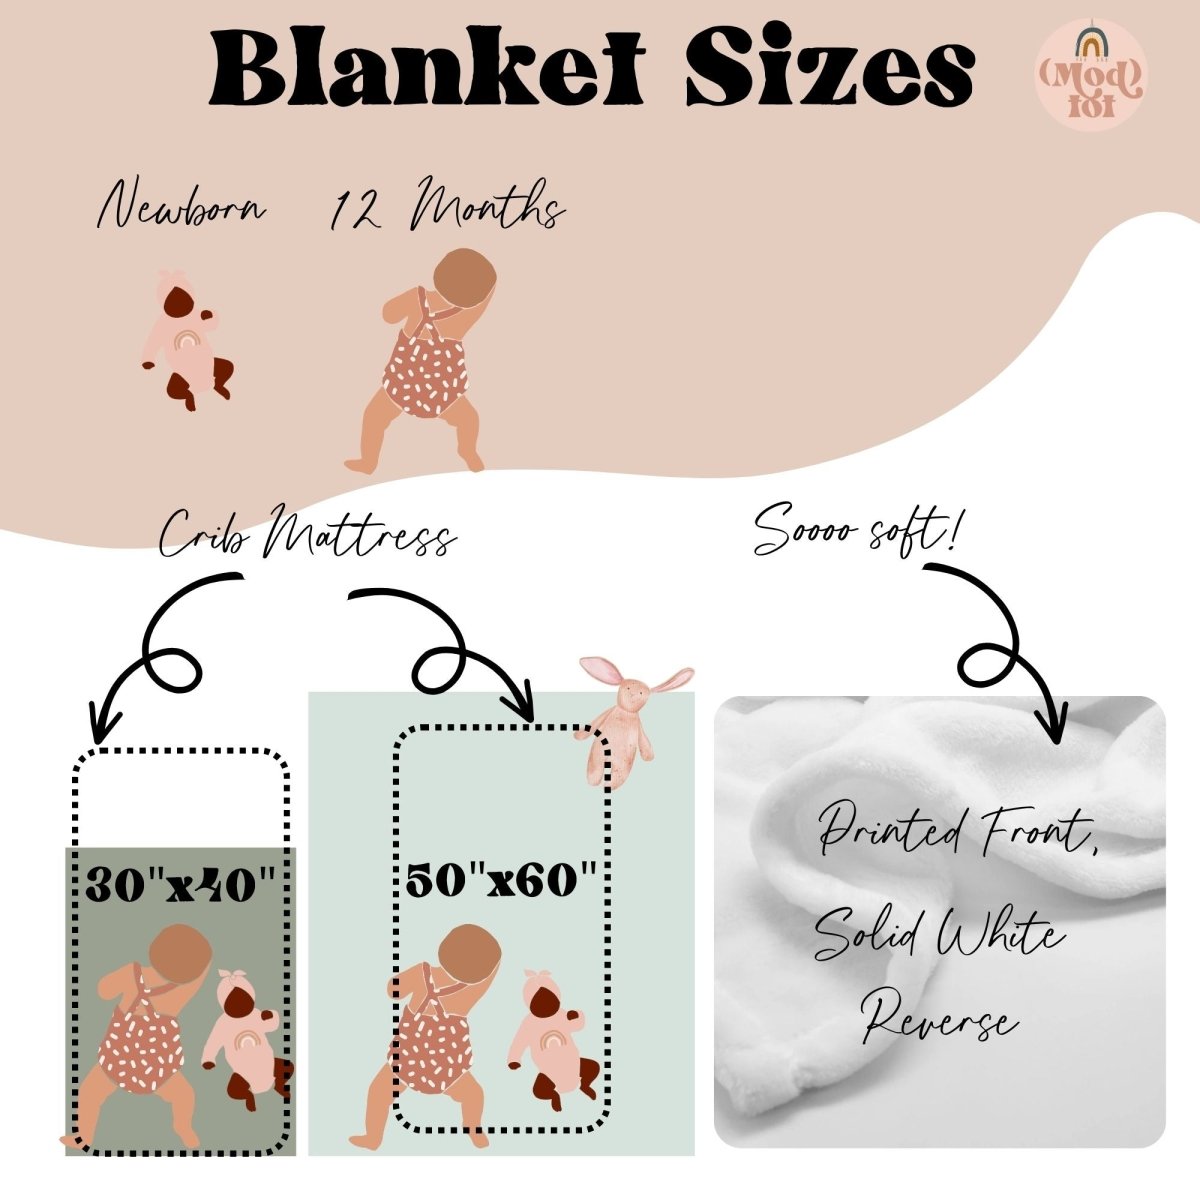 Cactus Floral Personalized Minky Blanket - Cactus Floral, gender_girl, Personalized_Yes